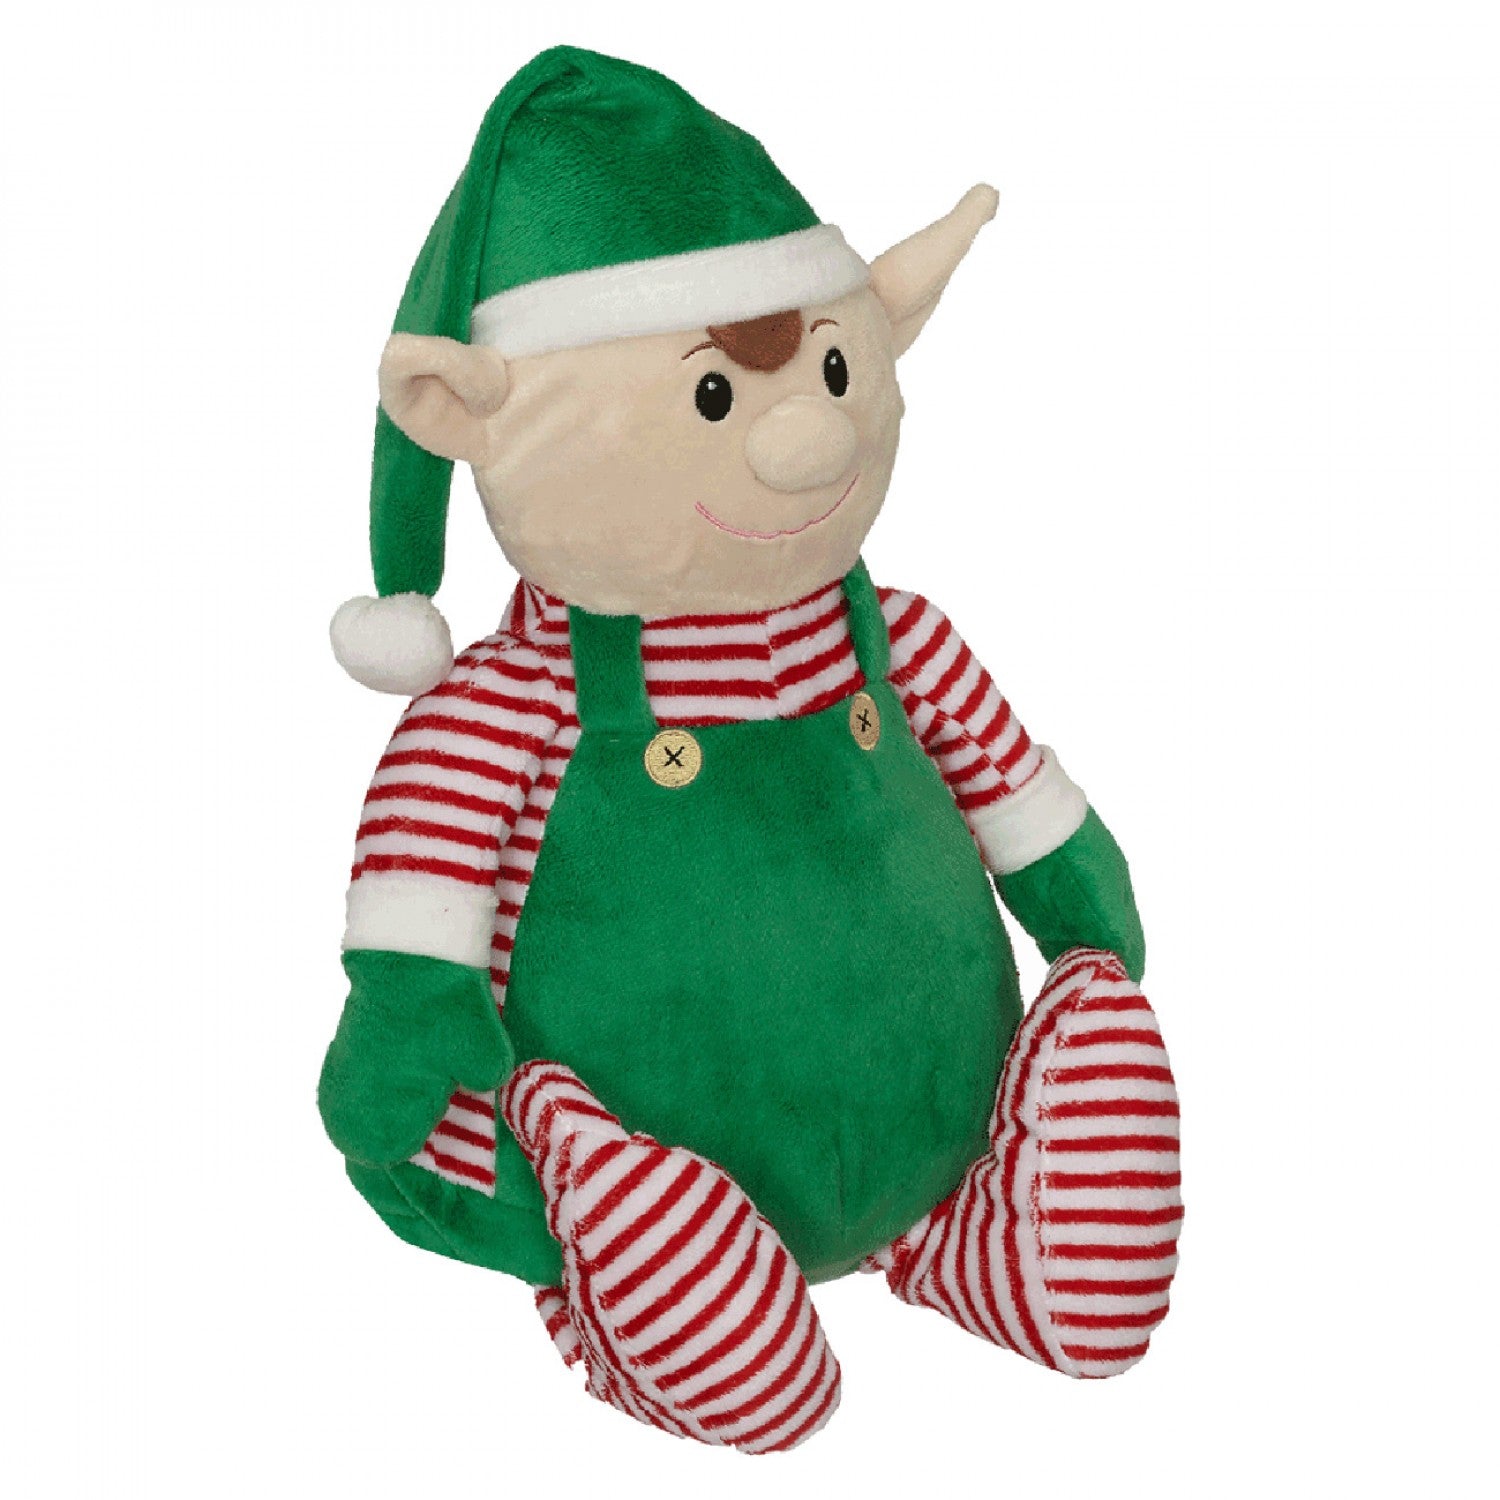 Elf Buddy - Ready for Personalization Embroidery or HTV